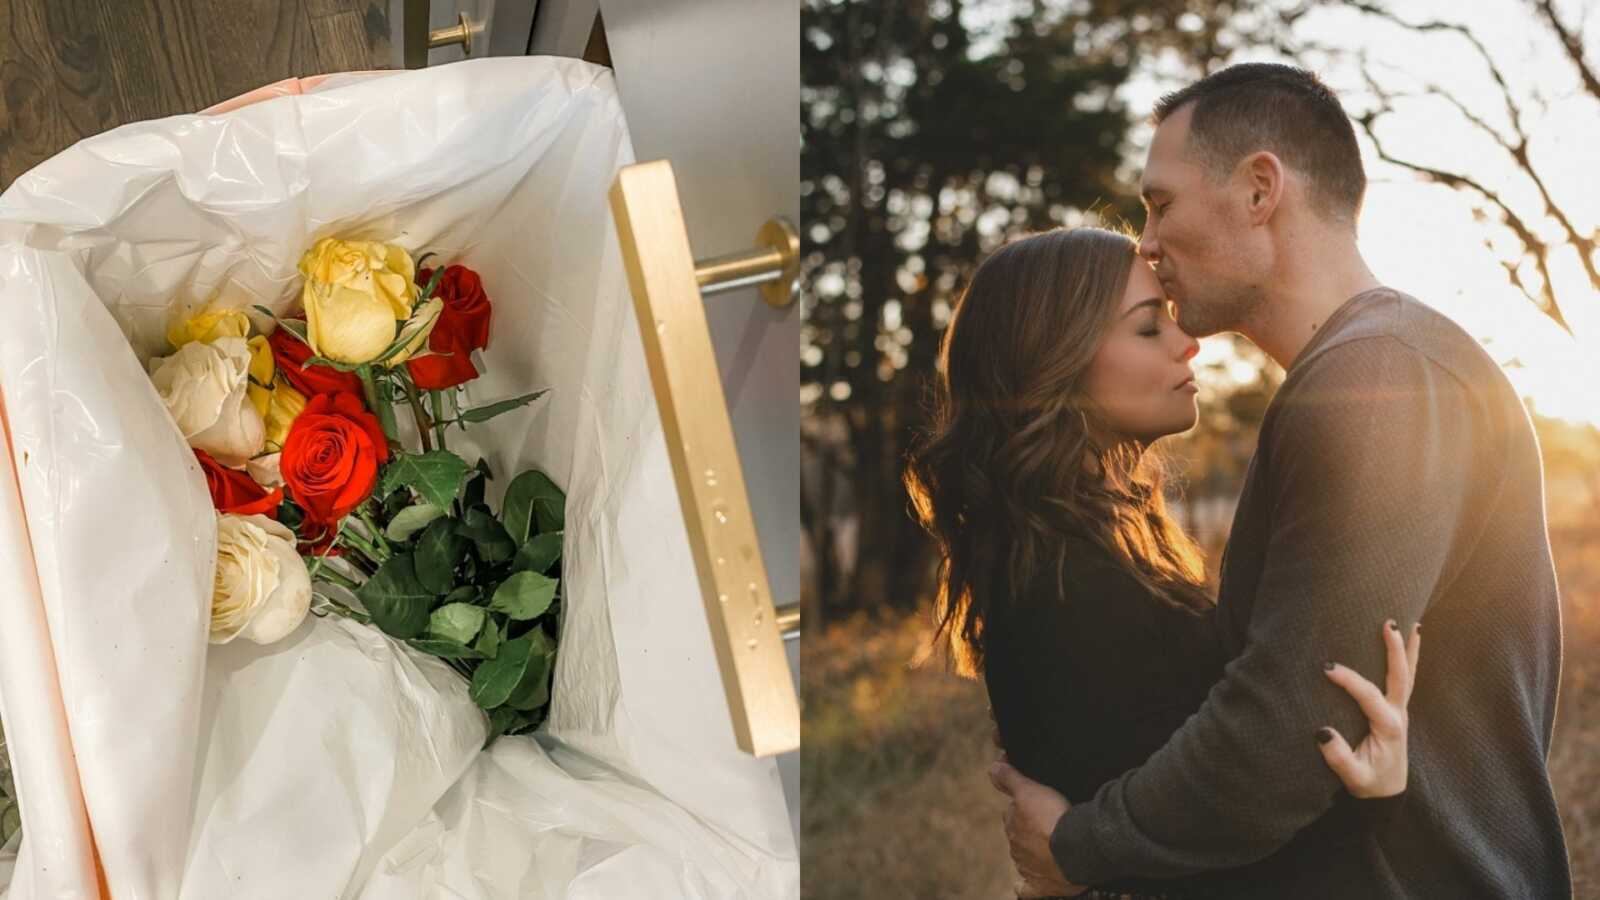 couple hugging outside in forest next to an ikmage of a bouquet of roses in the trash